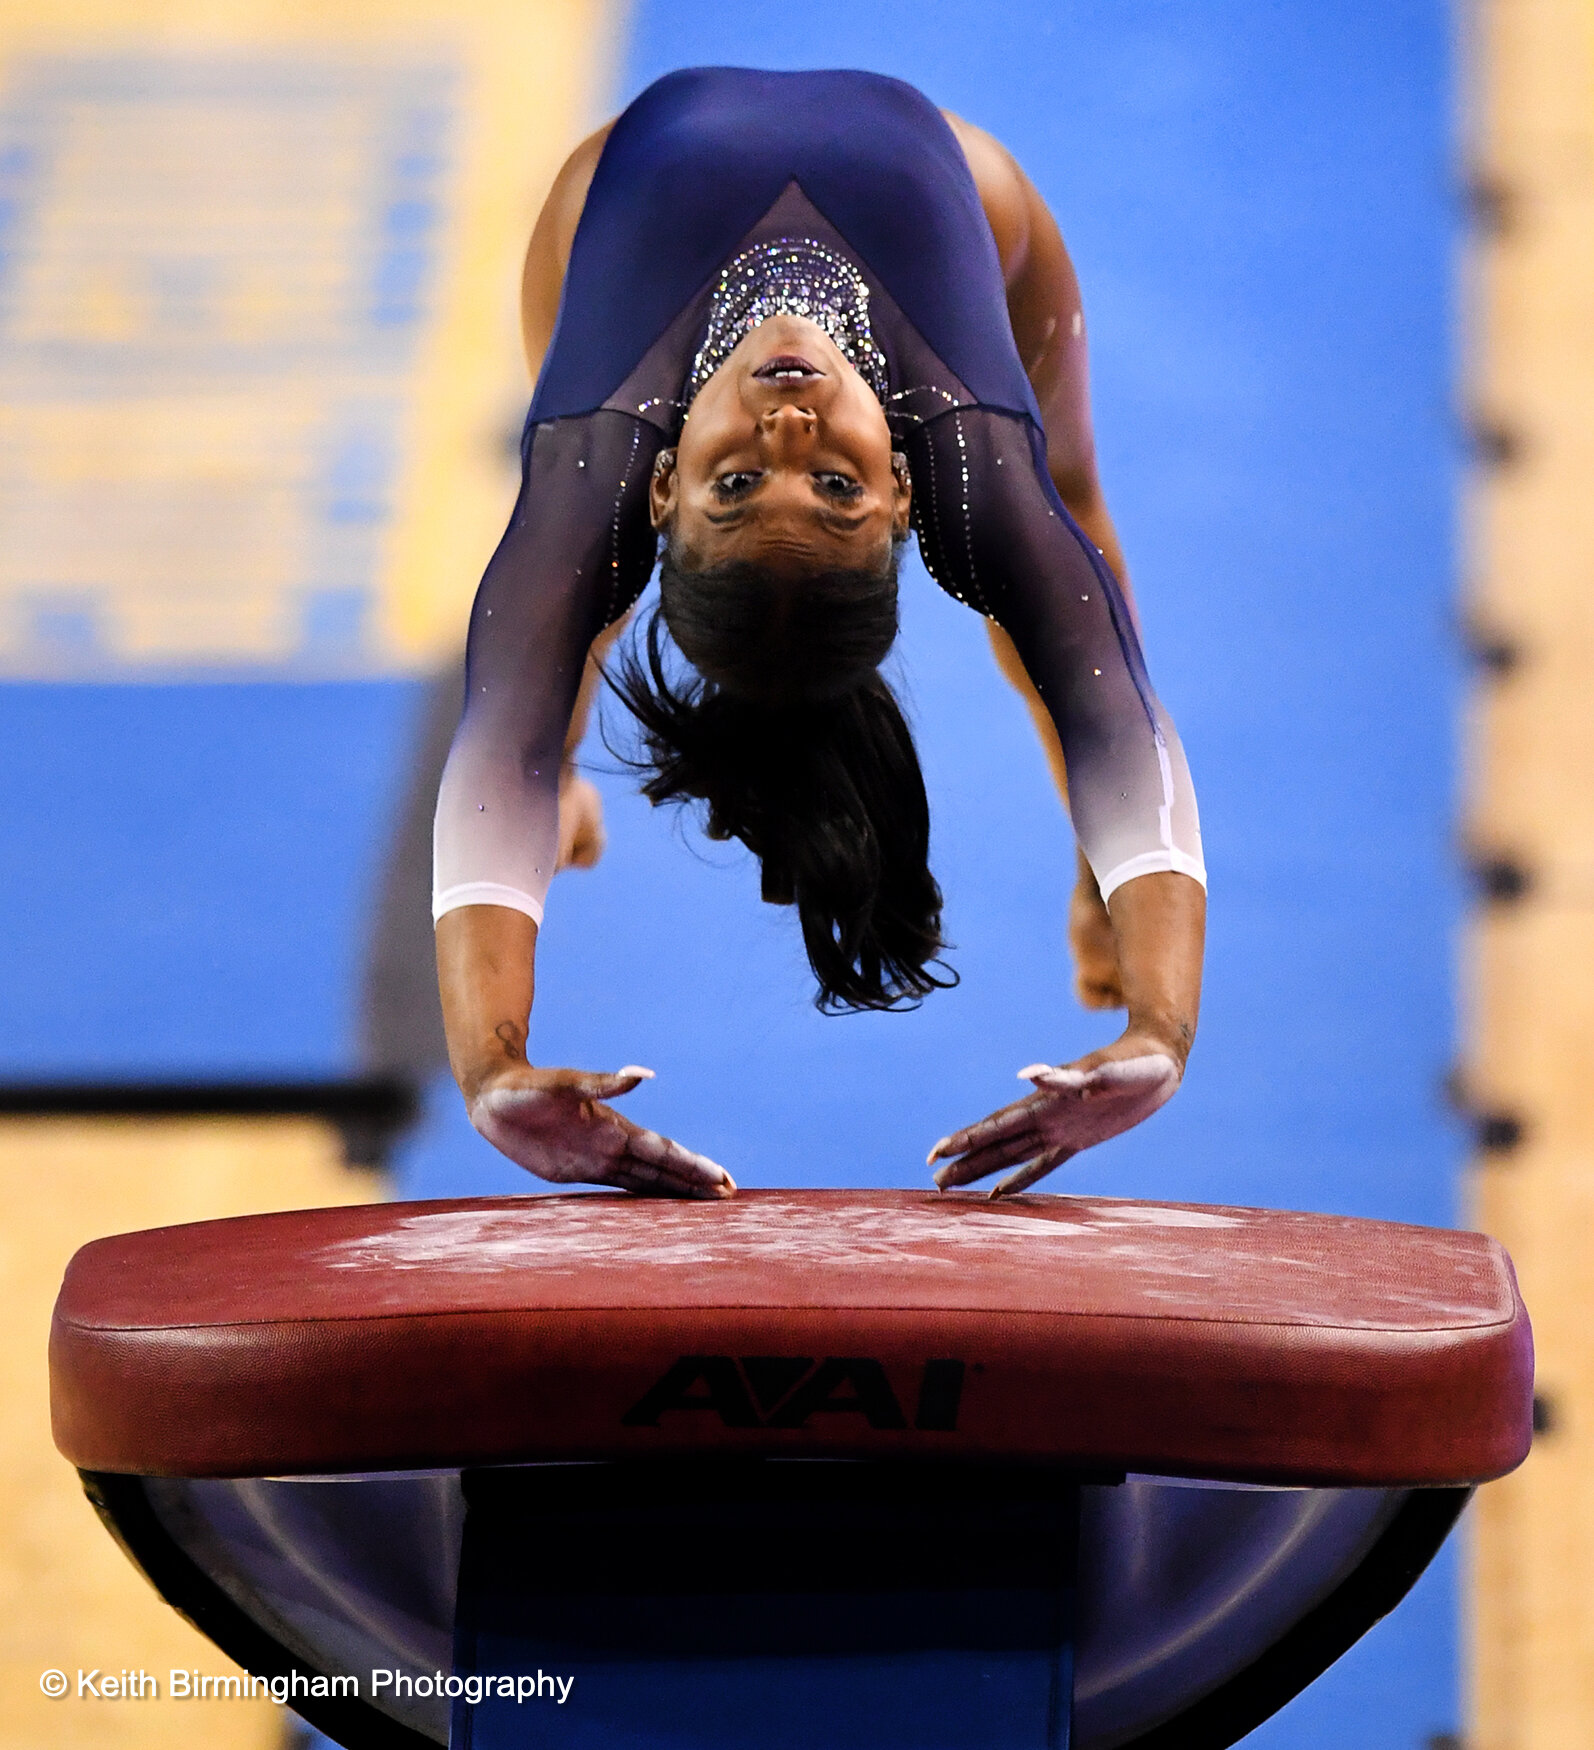  UCLA Bruins gymnast Nia Dennis competes in the vault against the Arizona State Wildcats during the season opener in Pauley Pavilion on the campus of UCLA in Los Angeles on Saturday, January 23, 2021. (Photo by Keith Birmingham, Pasadena Star-News/ S